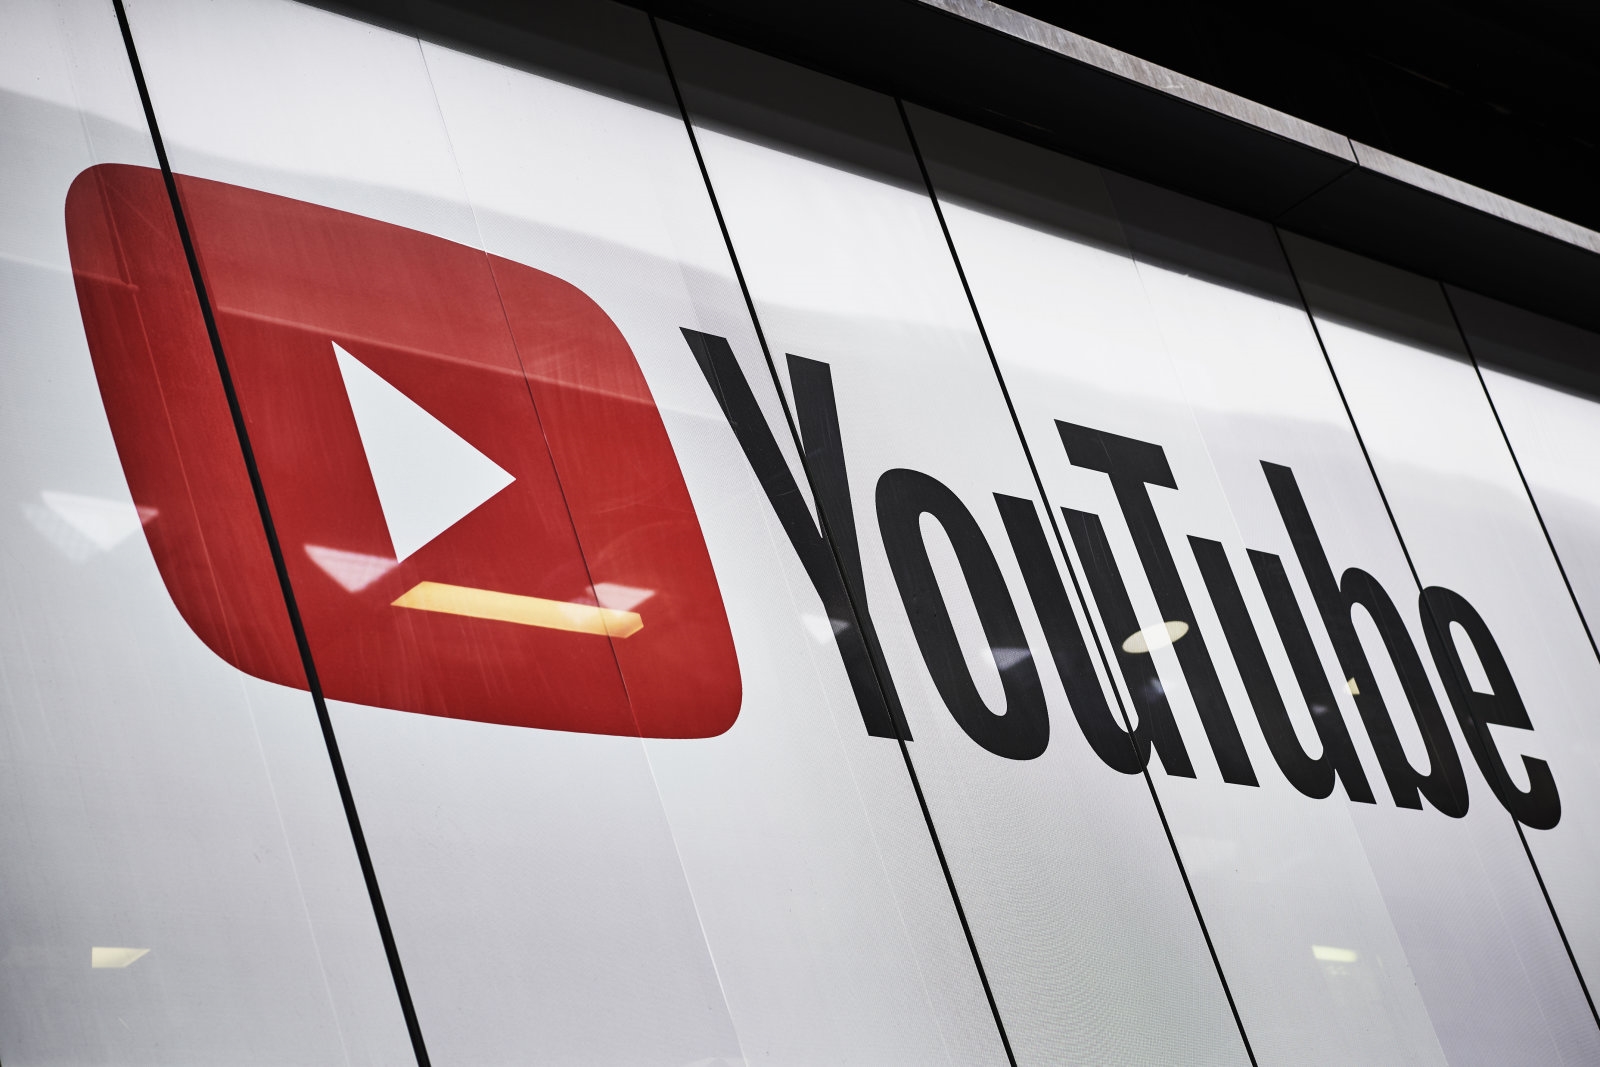 Study says YouTube 'actively discourages' radicalism | DeviceDaily.com